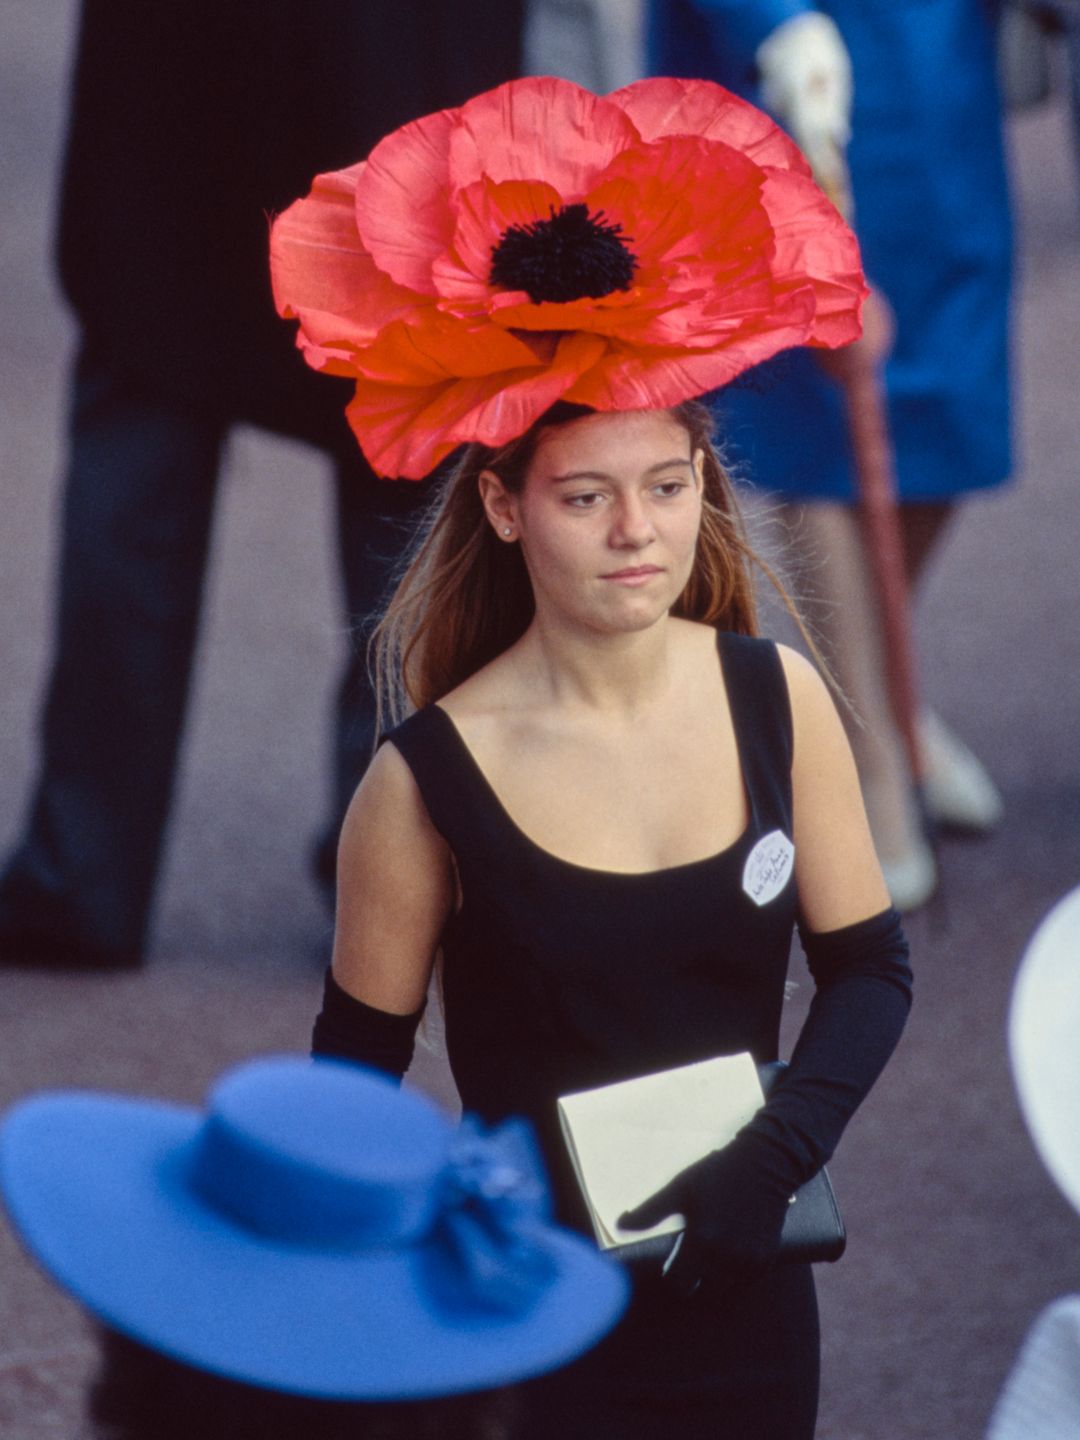 A female racegoer wearing a black dress, black evening gloves, and a red poppy hat on the first day of the Royal Ascot, 19 June 1990.